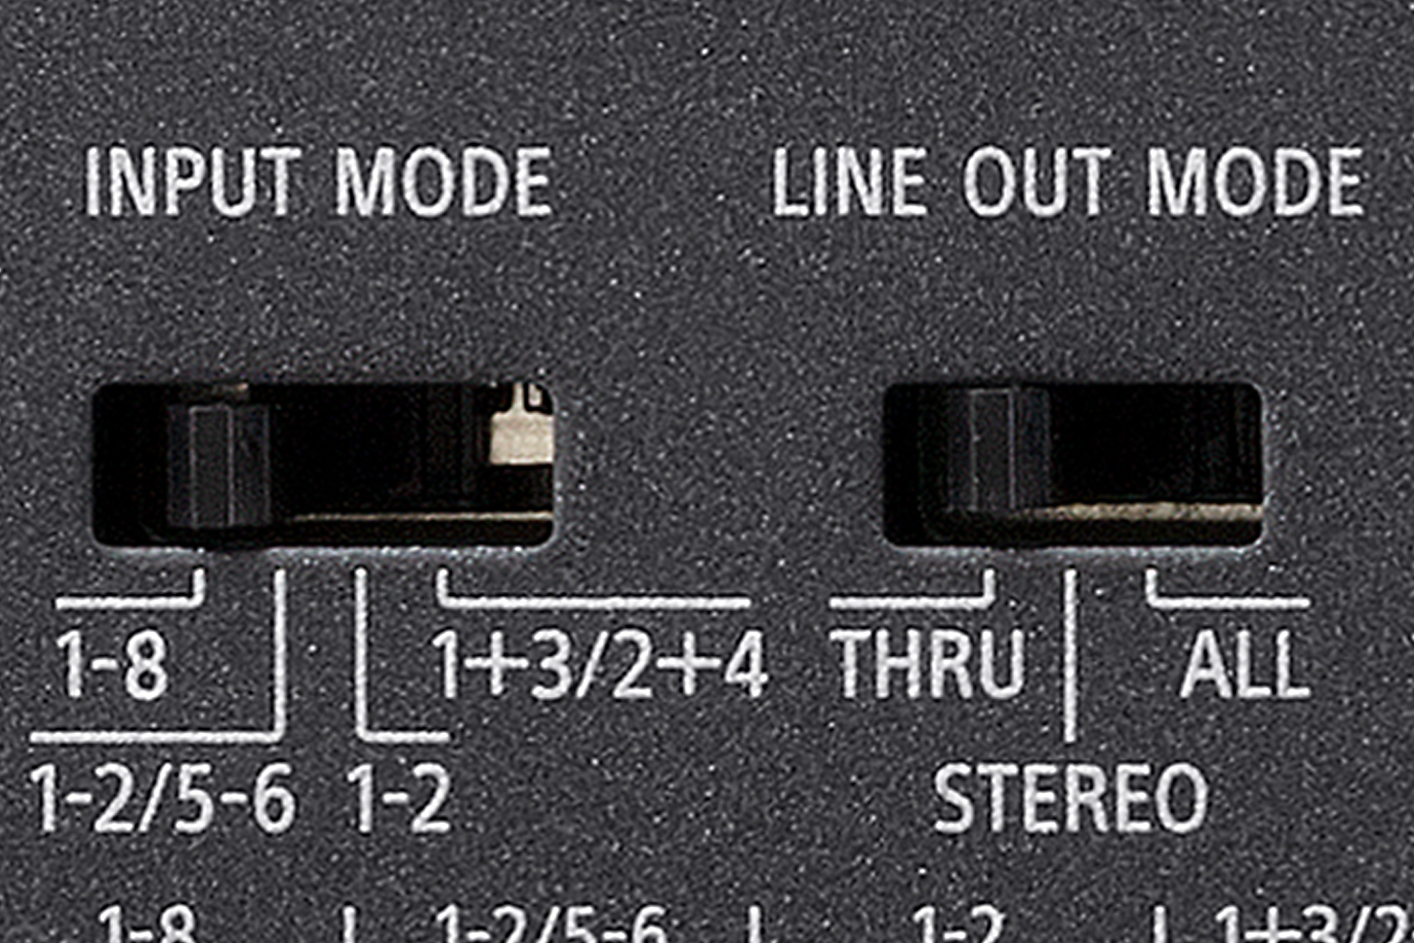 Close up image of input mode and line out mode switches